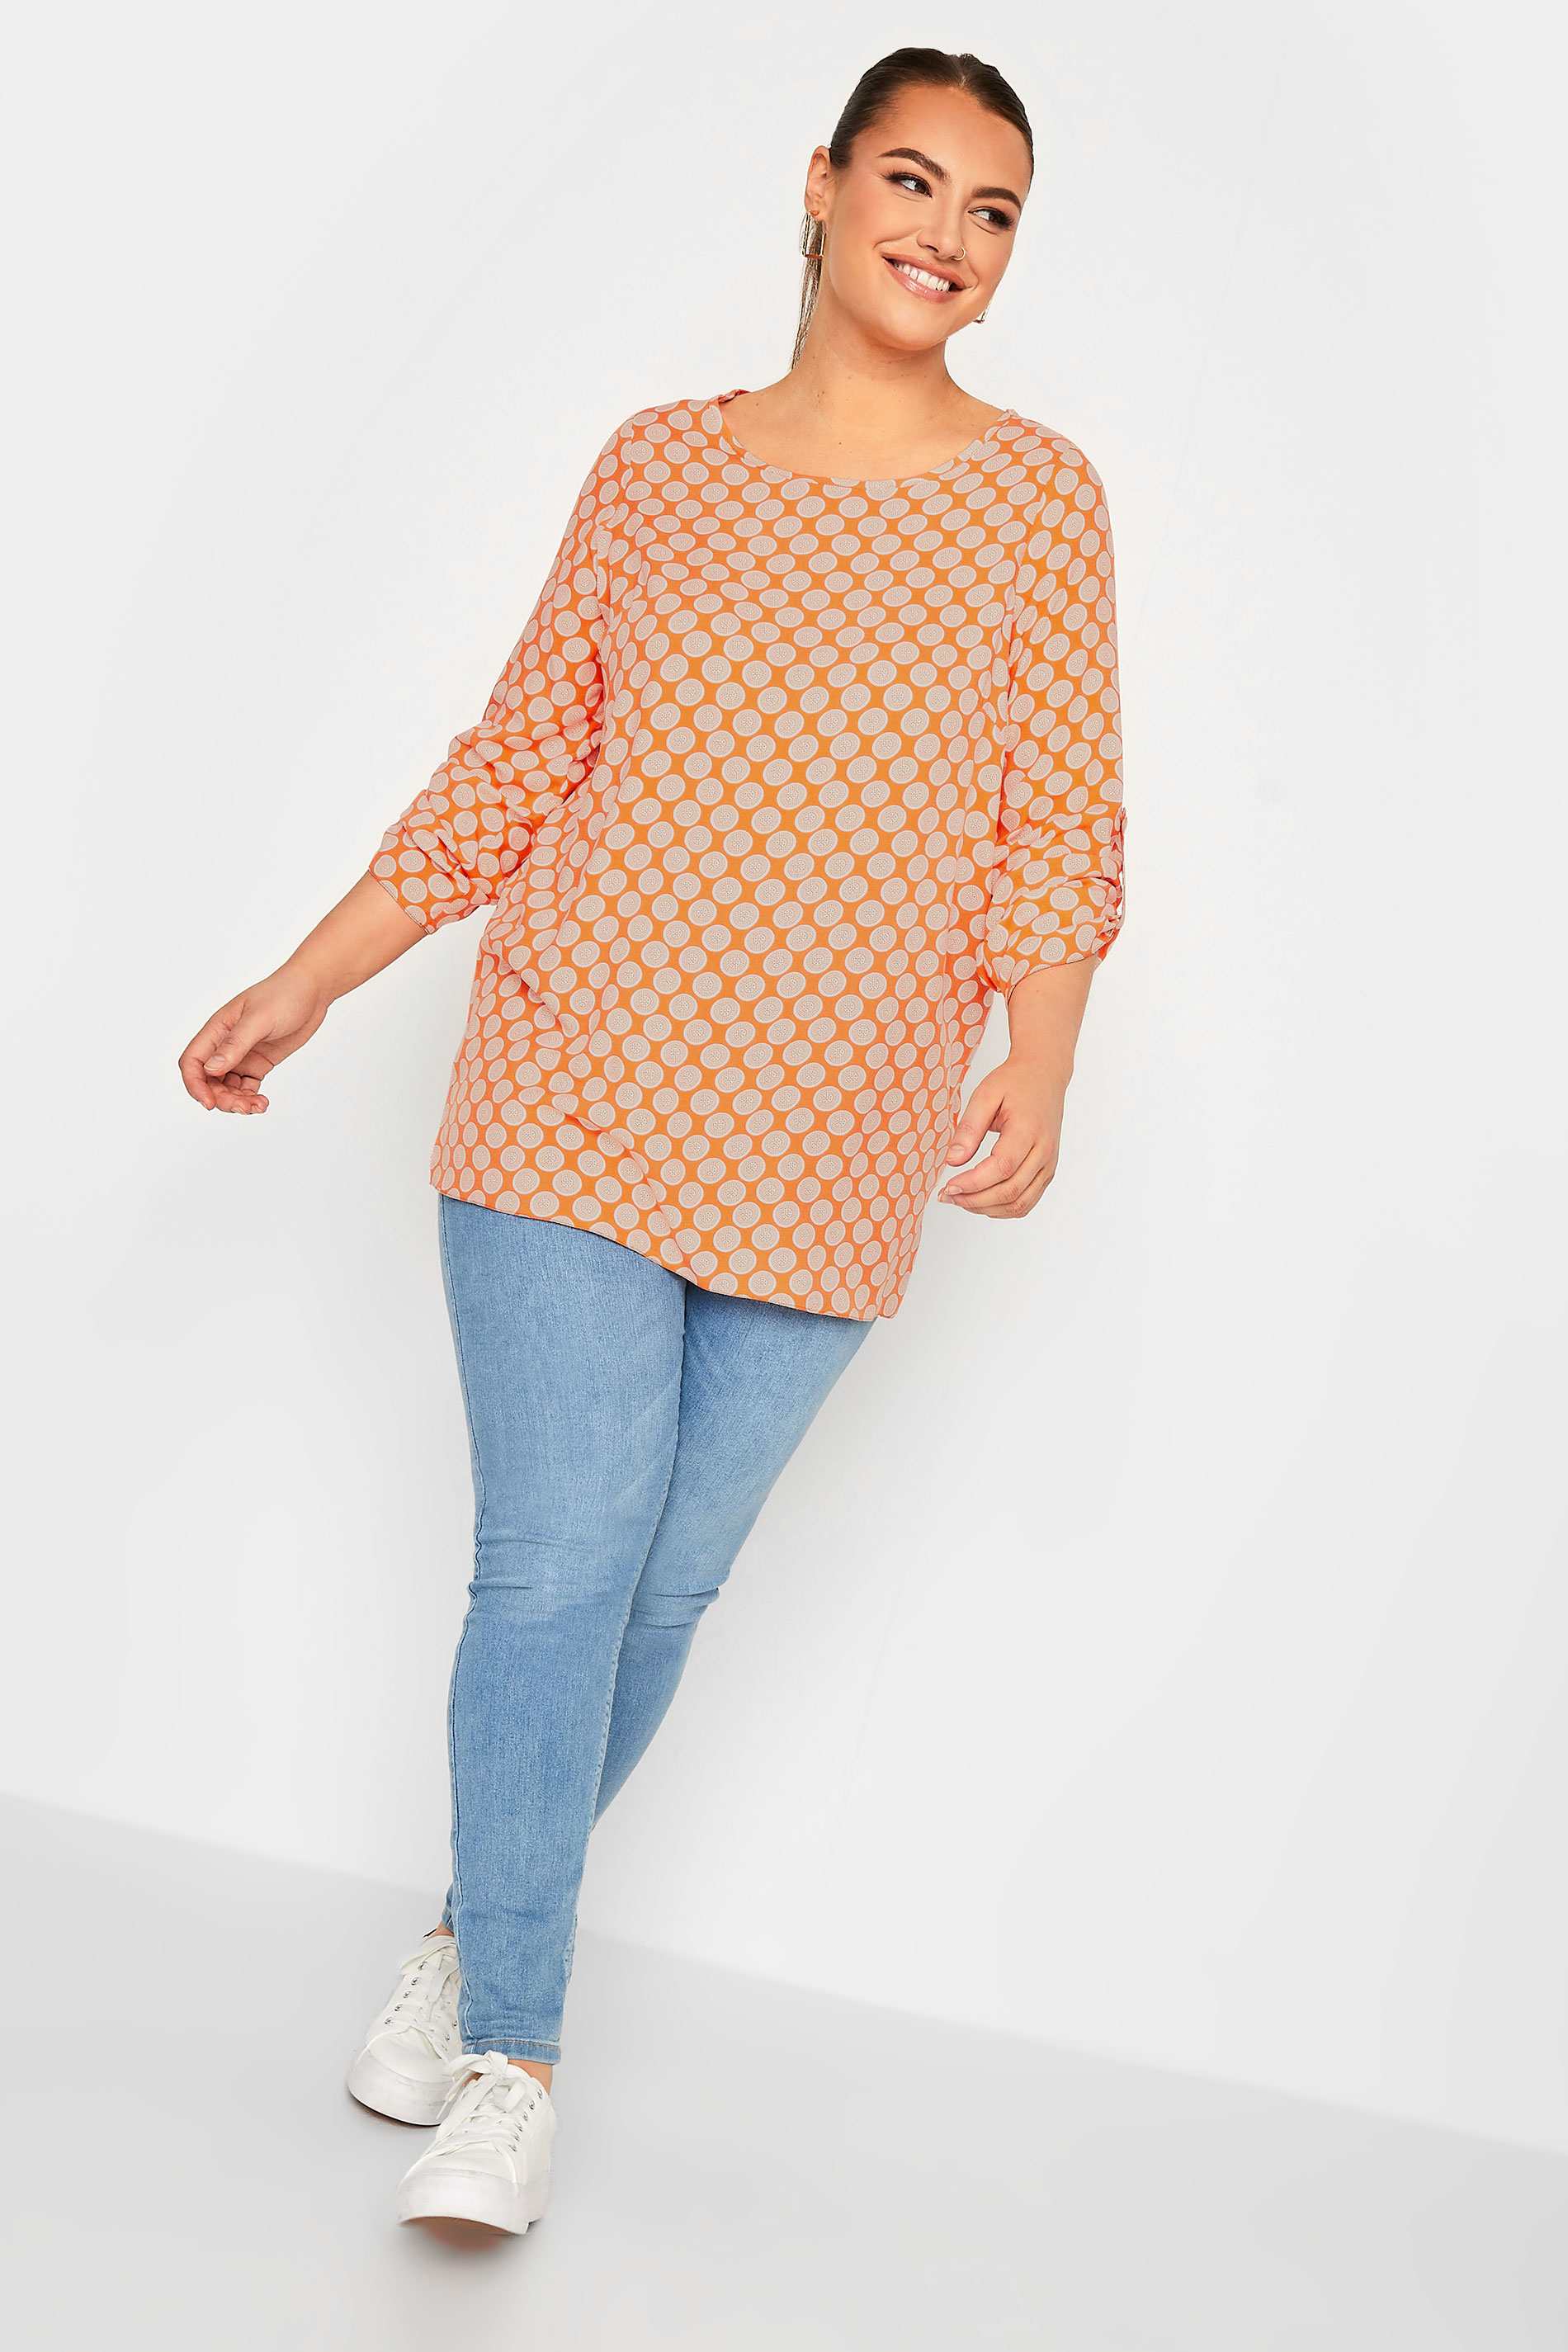 YOURS Plus Size Orange Abstract Spot Print Blouse | Yours Clothing  2